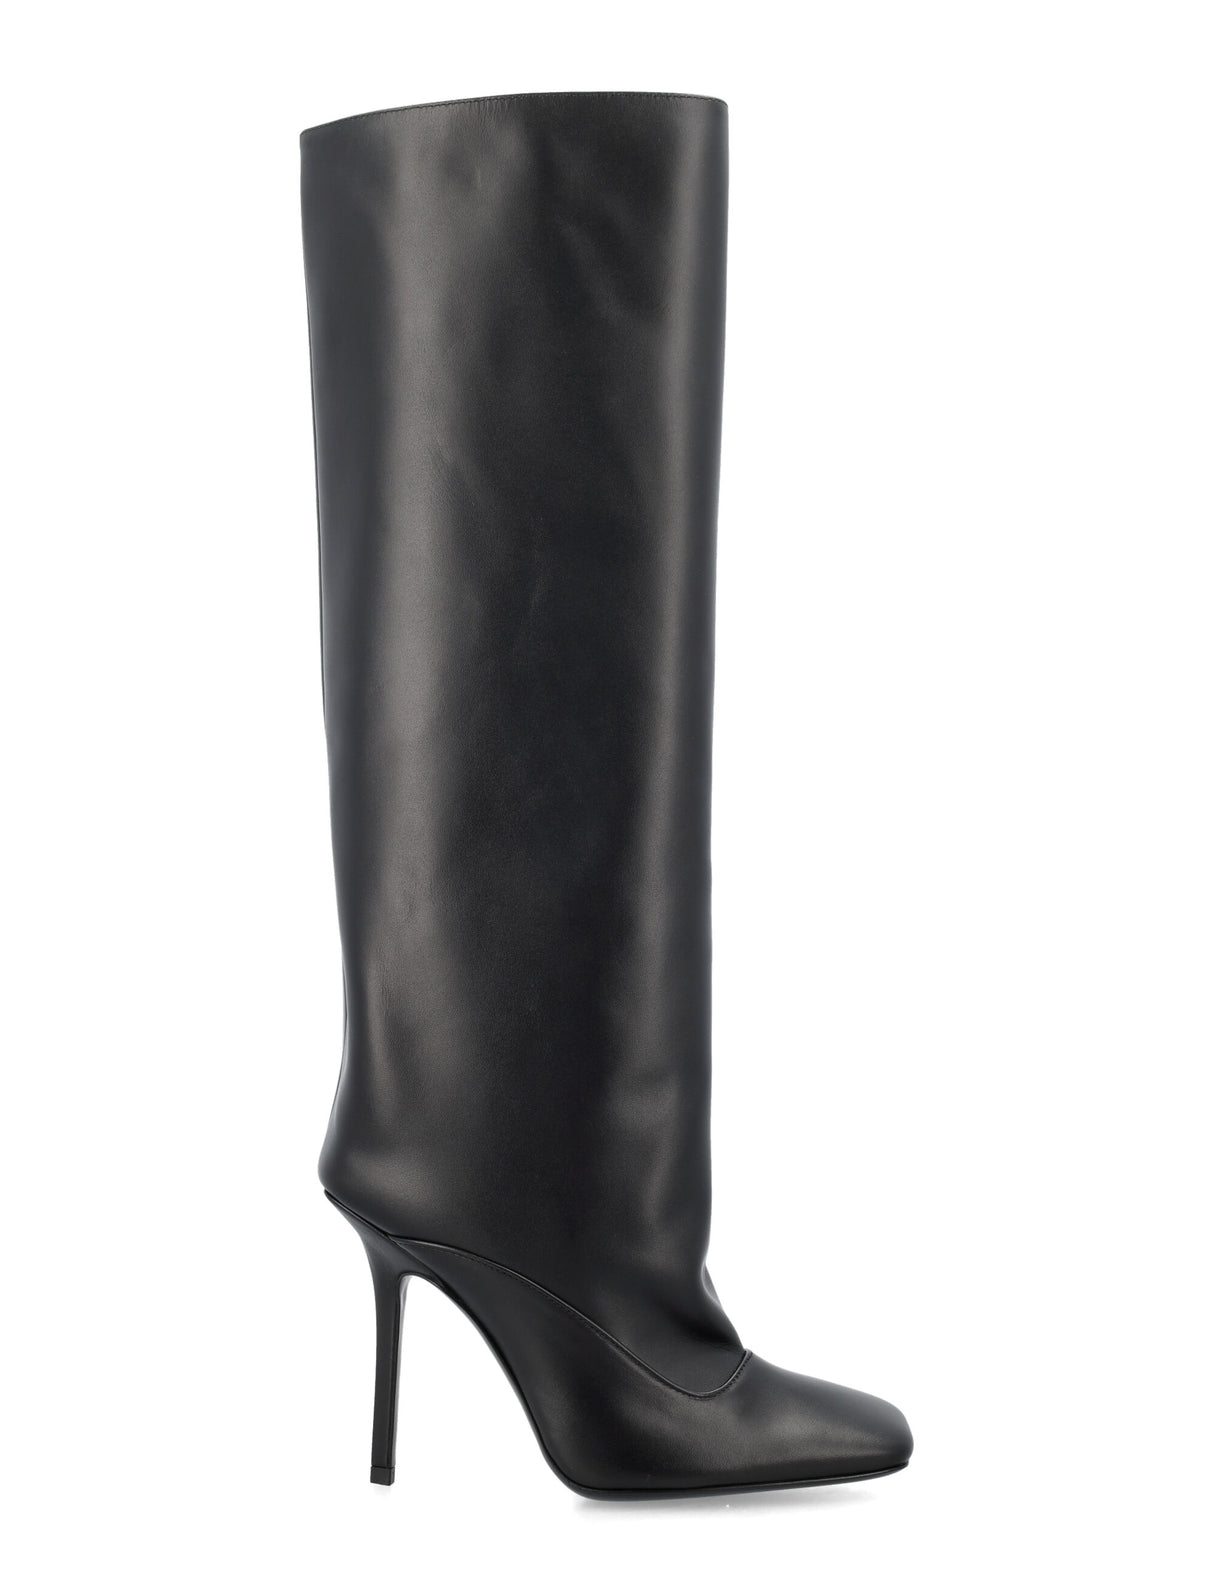 ‎‎‎‎‎‎‎‎‎‎‎‎‎‎‎‎‎‎‎‎‎‎‎‎Knee-High Leather Boot with Square Toe and Stiletto Heel for Women